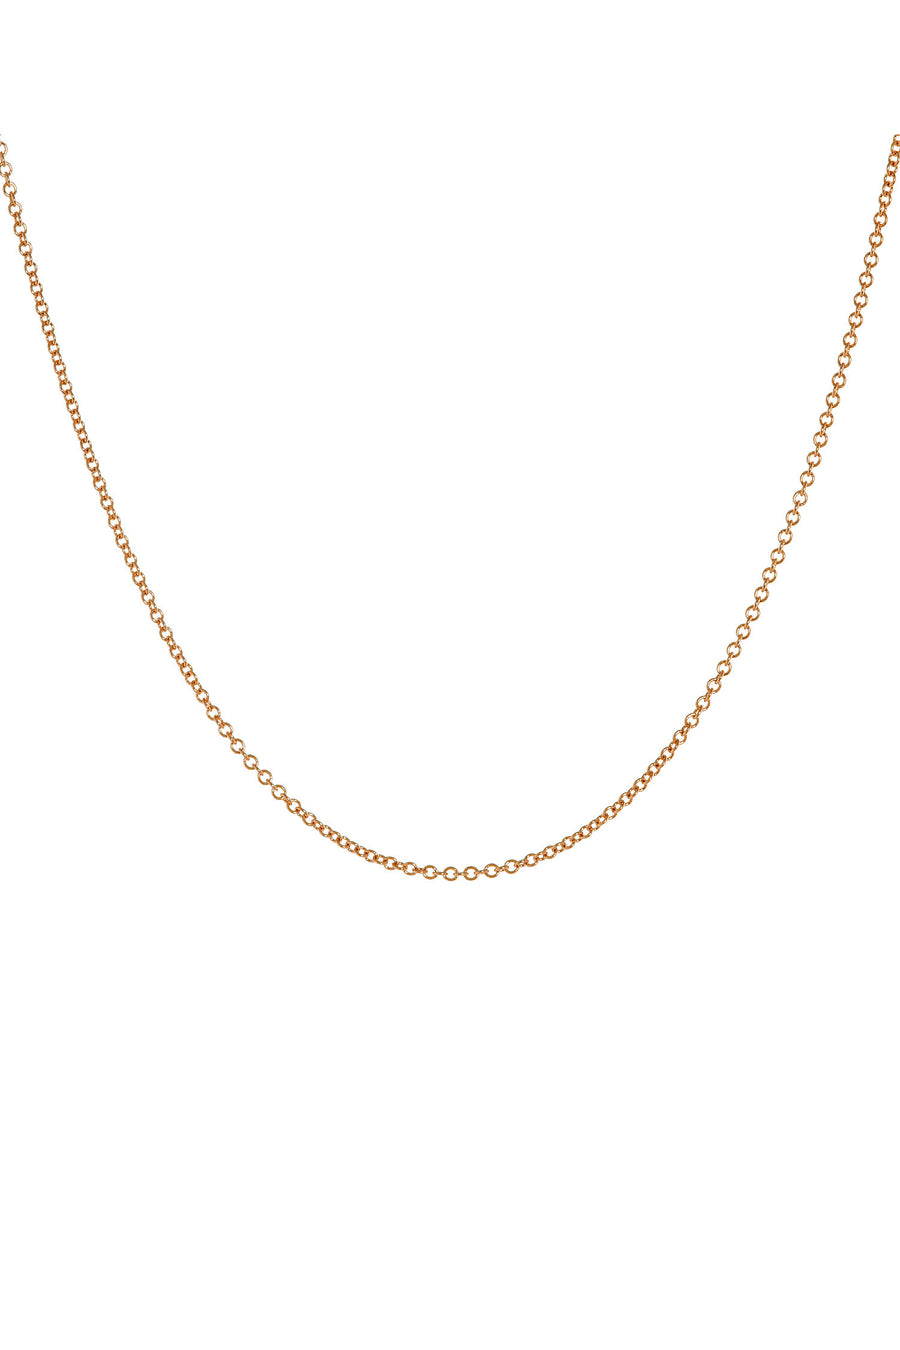 2.0mm Cable Chain Necklace in 14k Gold | 18"